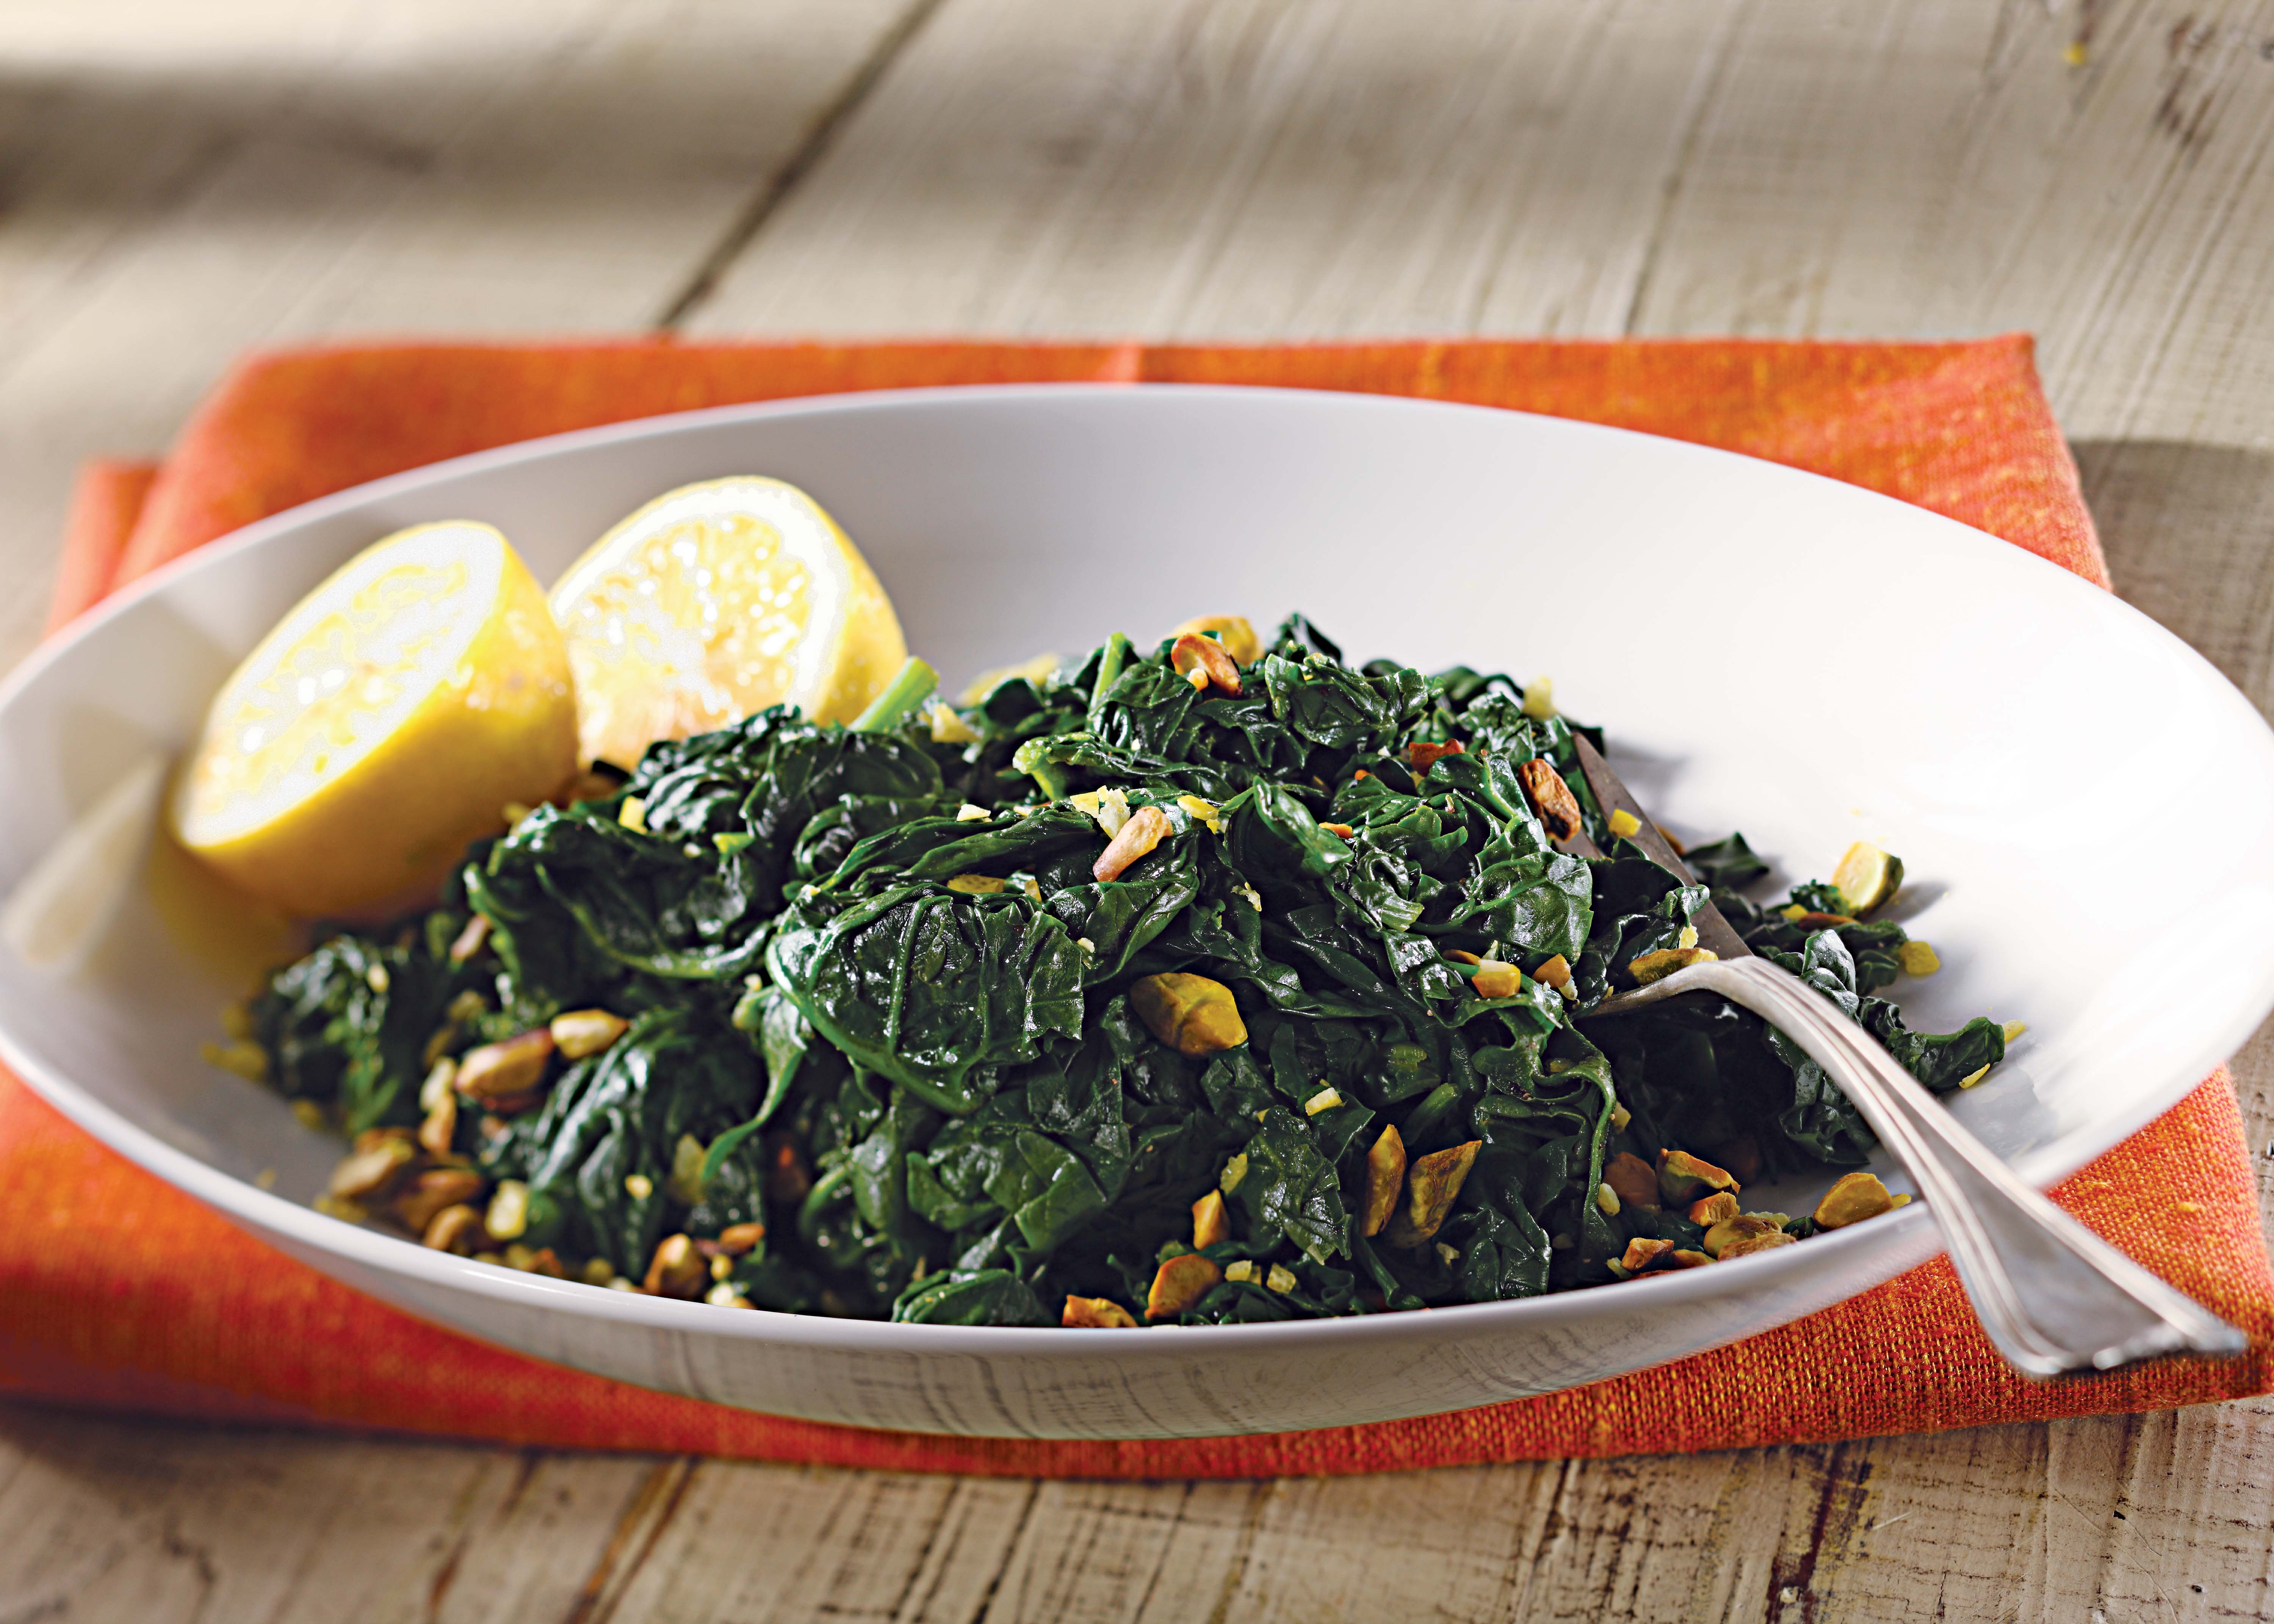 Lemon-Spinach-With-Toasted-Pistachios-Relish.jpg